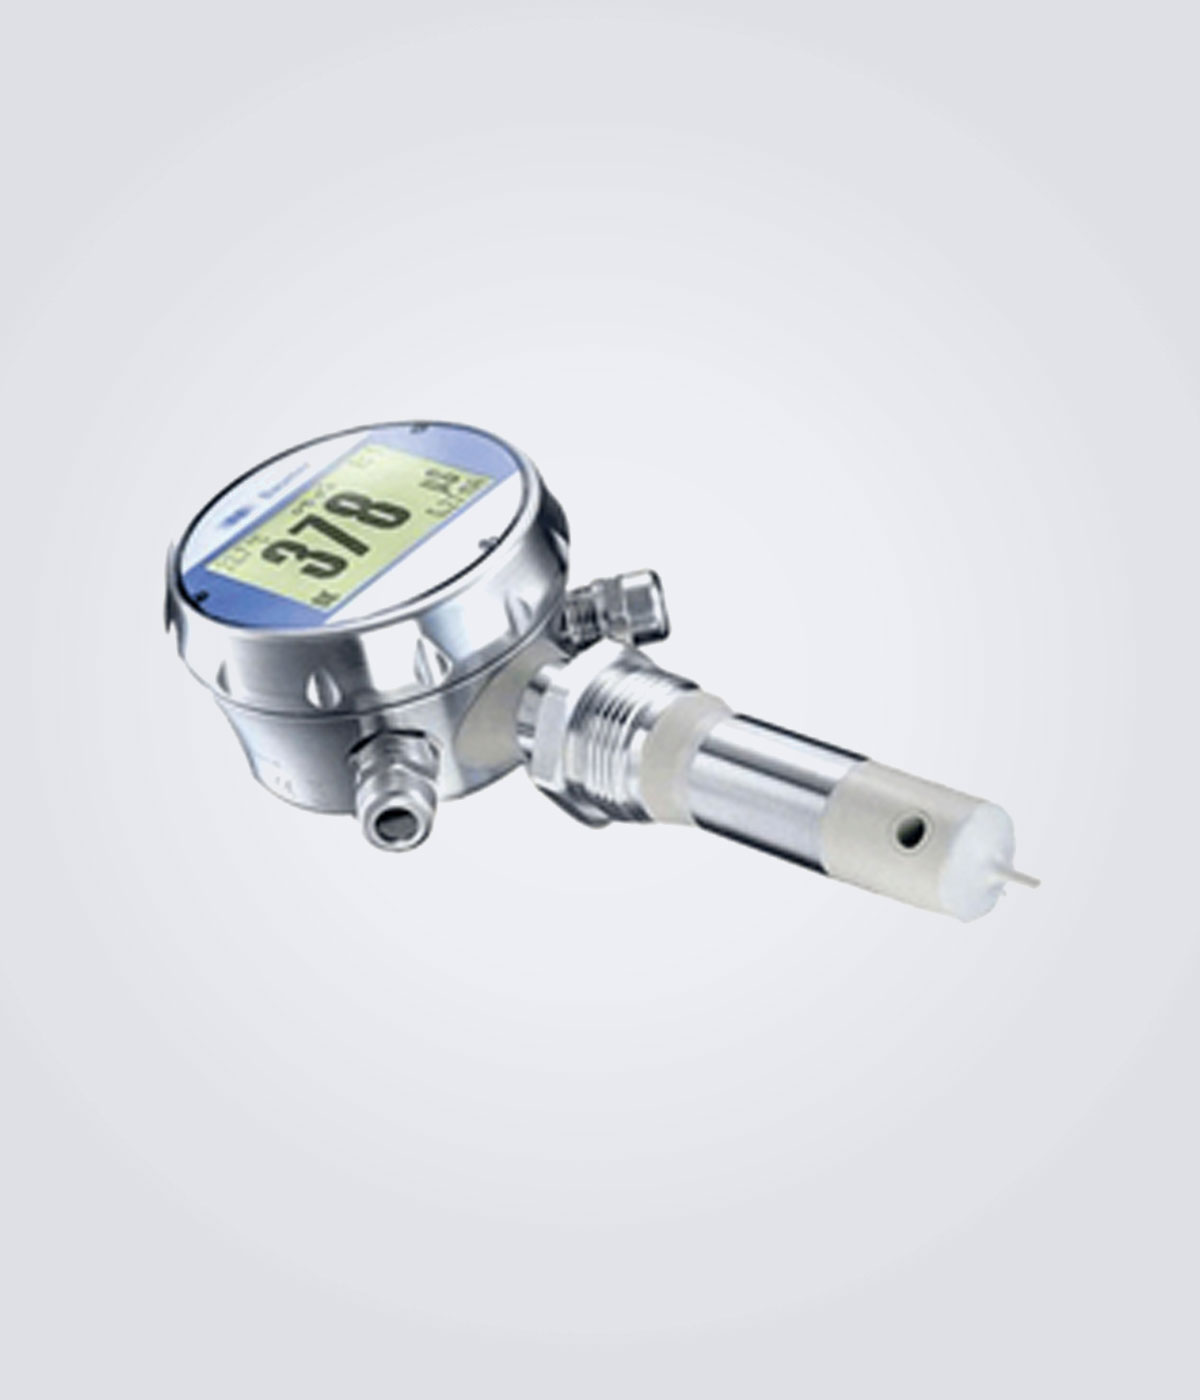 online-conductivity-transmitter-for-pharma-use